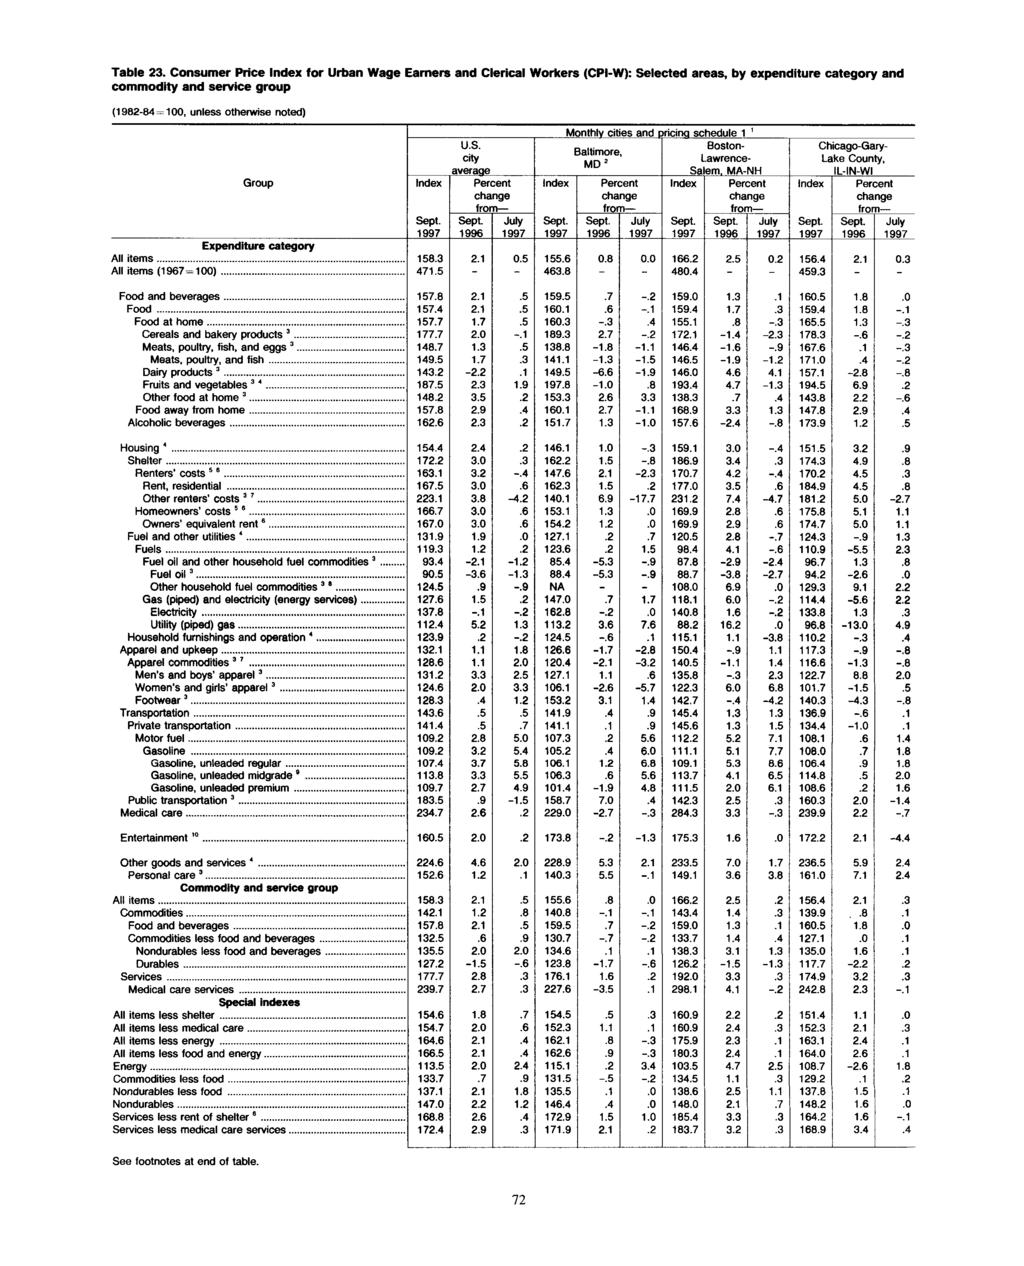 Table 23. Consumer Price for Urban Wage Earners and Clerical Workers (CPI-W): Selected areas, by expenditure category and commodity and service group (1982-84=100, unless otherwise noted) U.S. city averaae Group Per< :ent cha nge fror n Monthly cities and ciricing schedule 1 1 Boston- Baltimore, MD2 I.